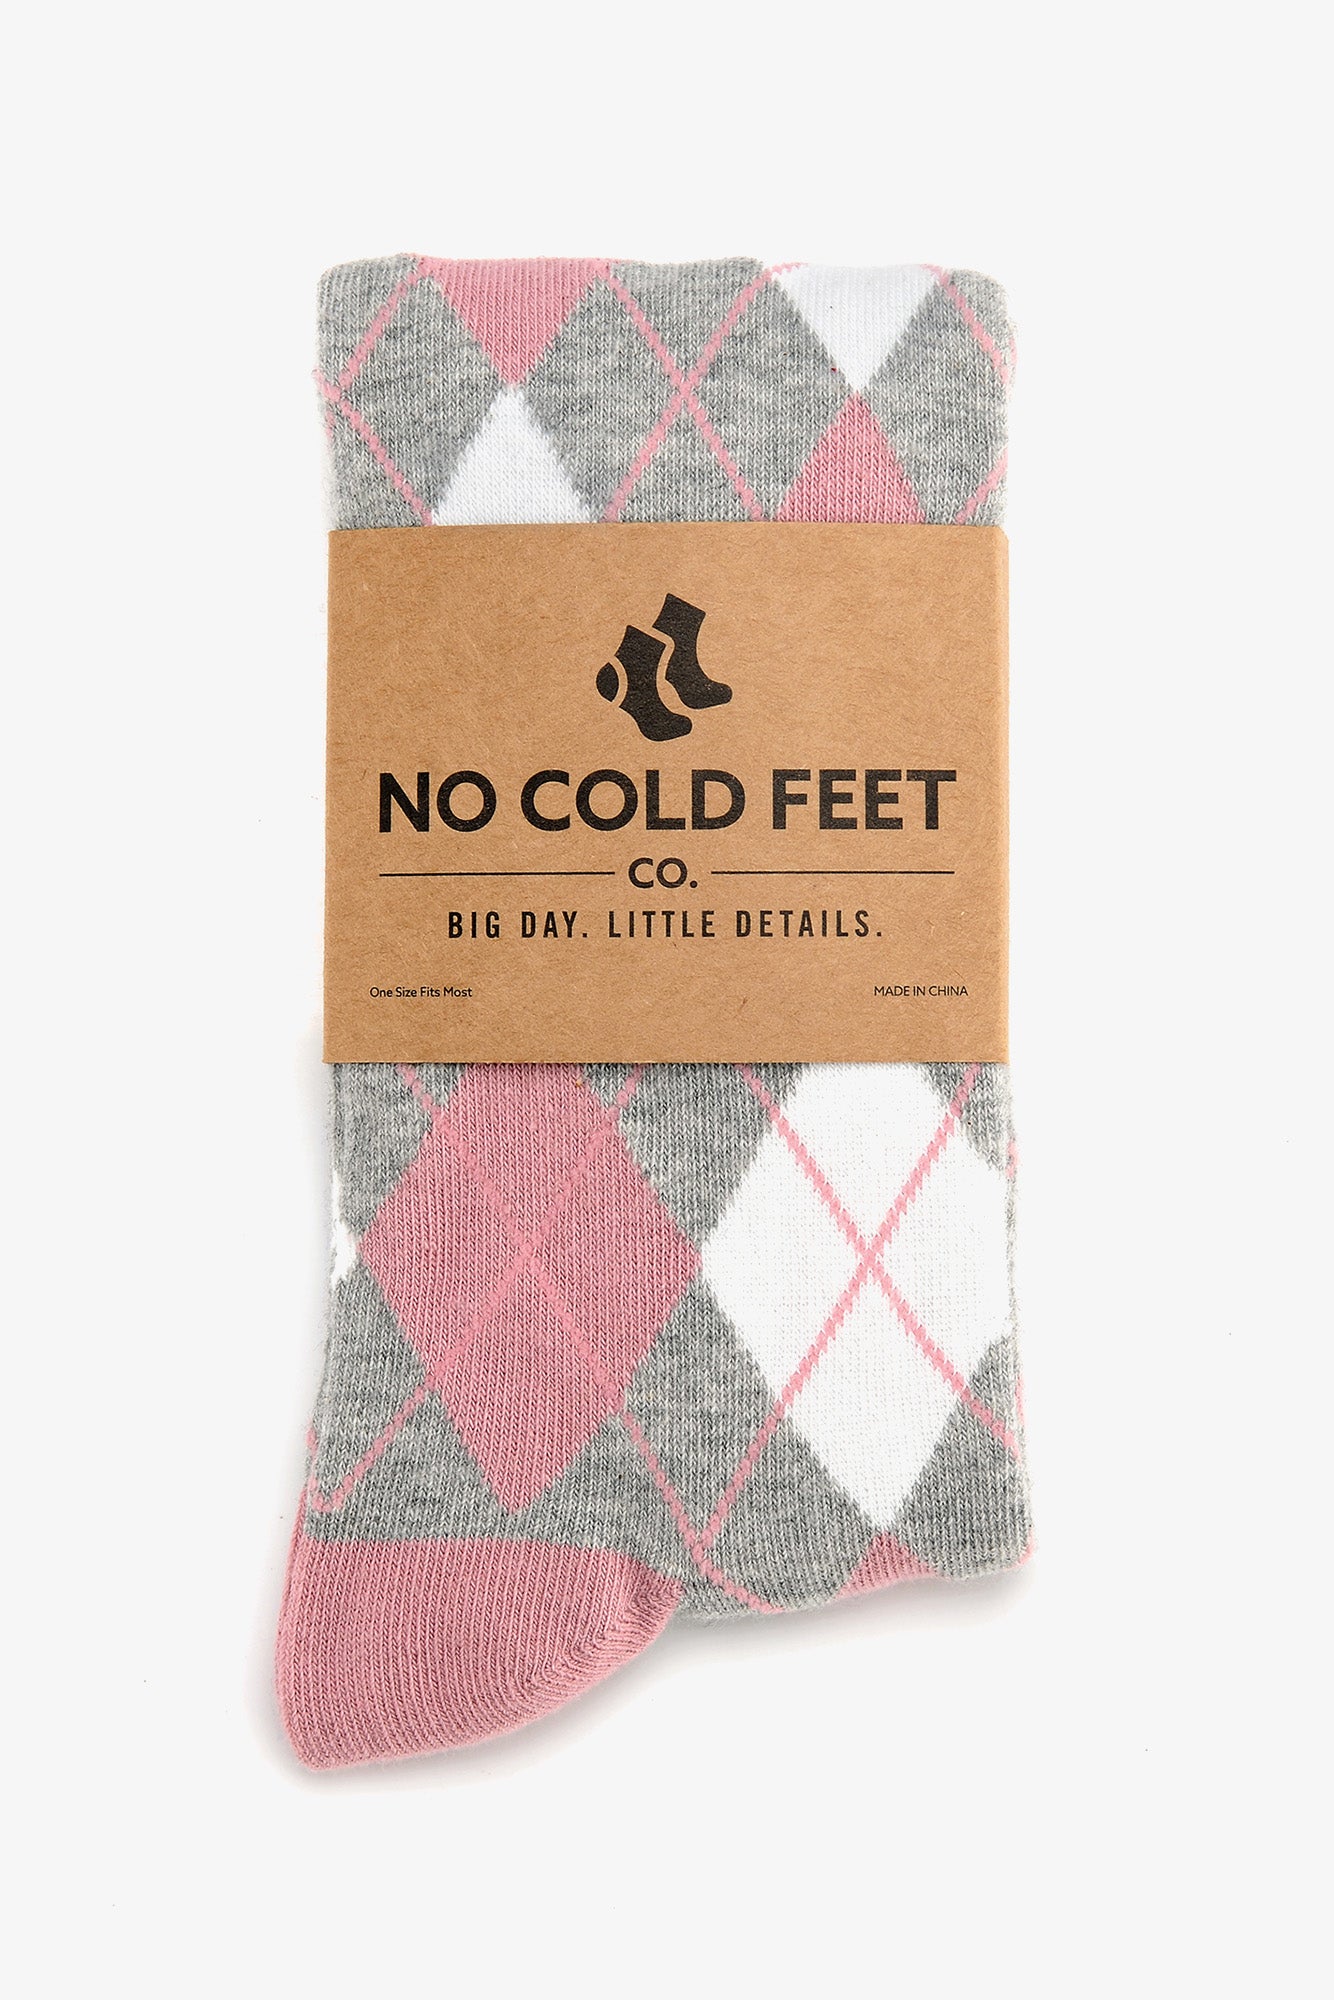 Dusty Rose and Grey Argyle Groomsmen Socks by No Cold Feet